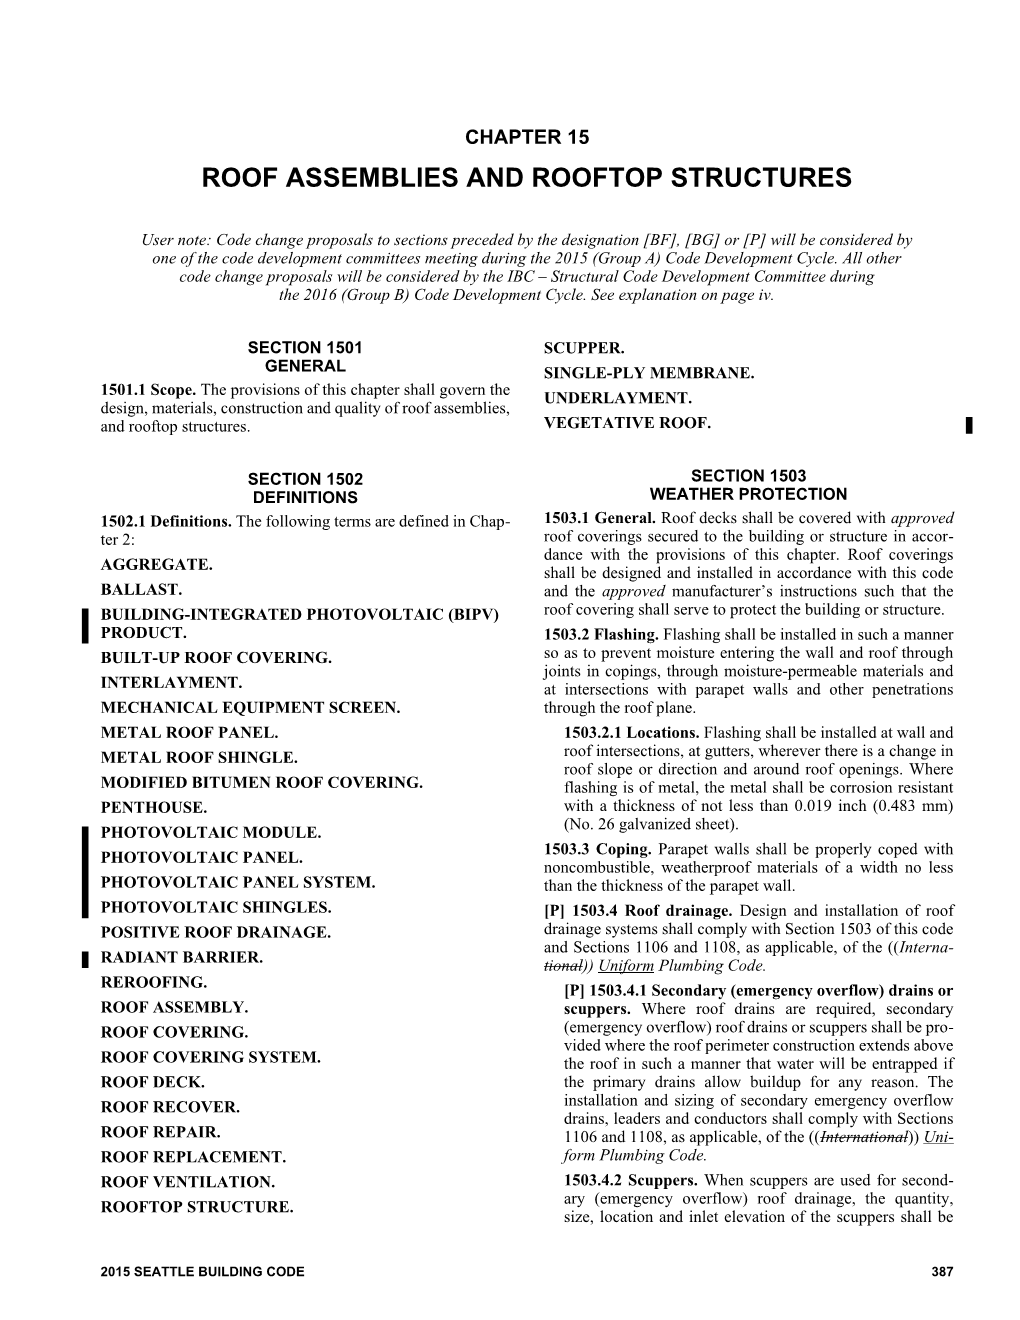 Chapter 15, Roof Assemblies and Rooftop Structures